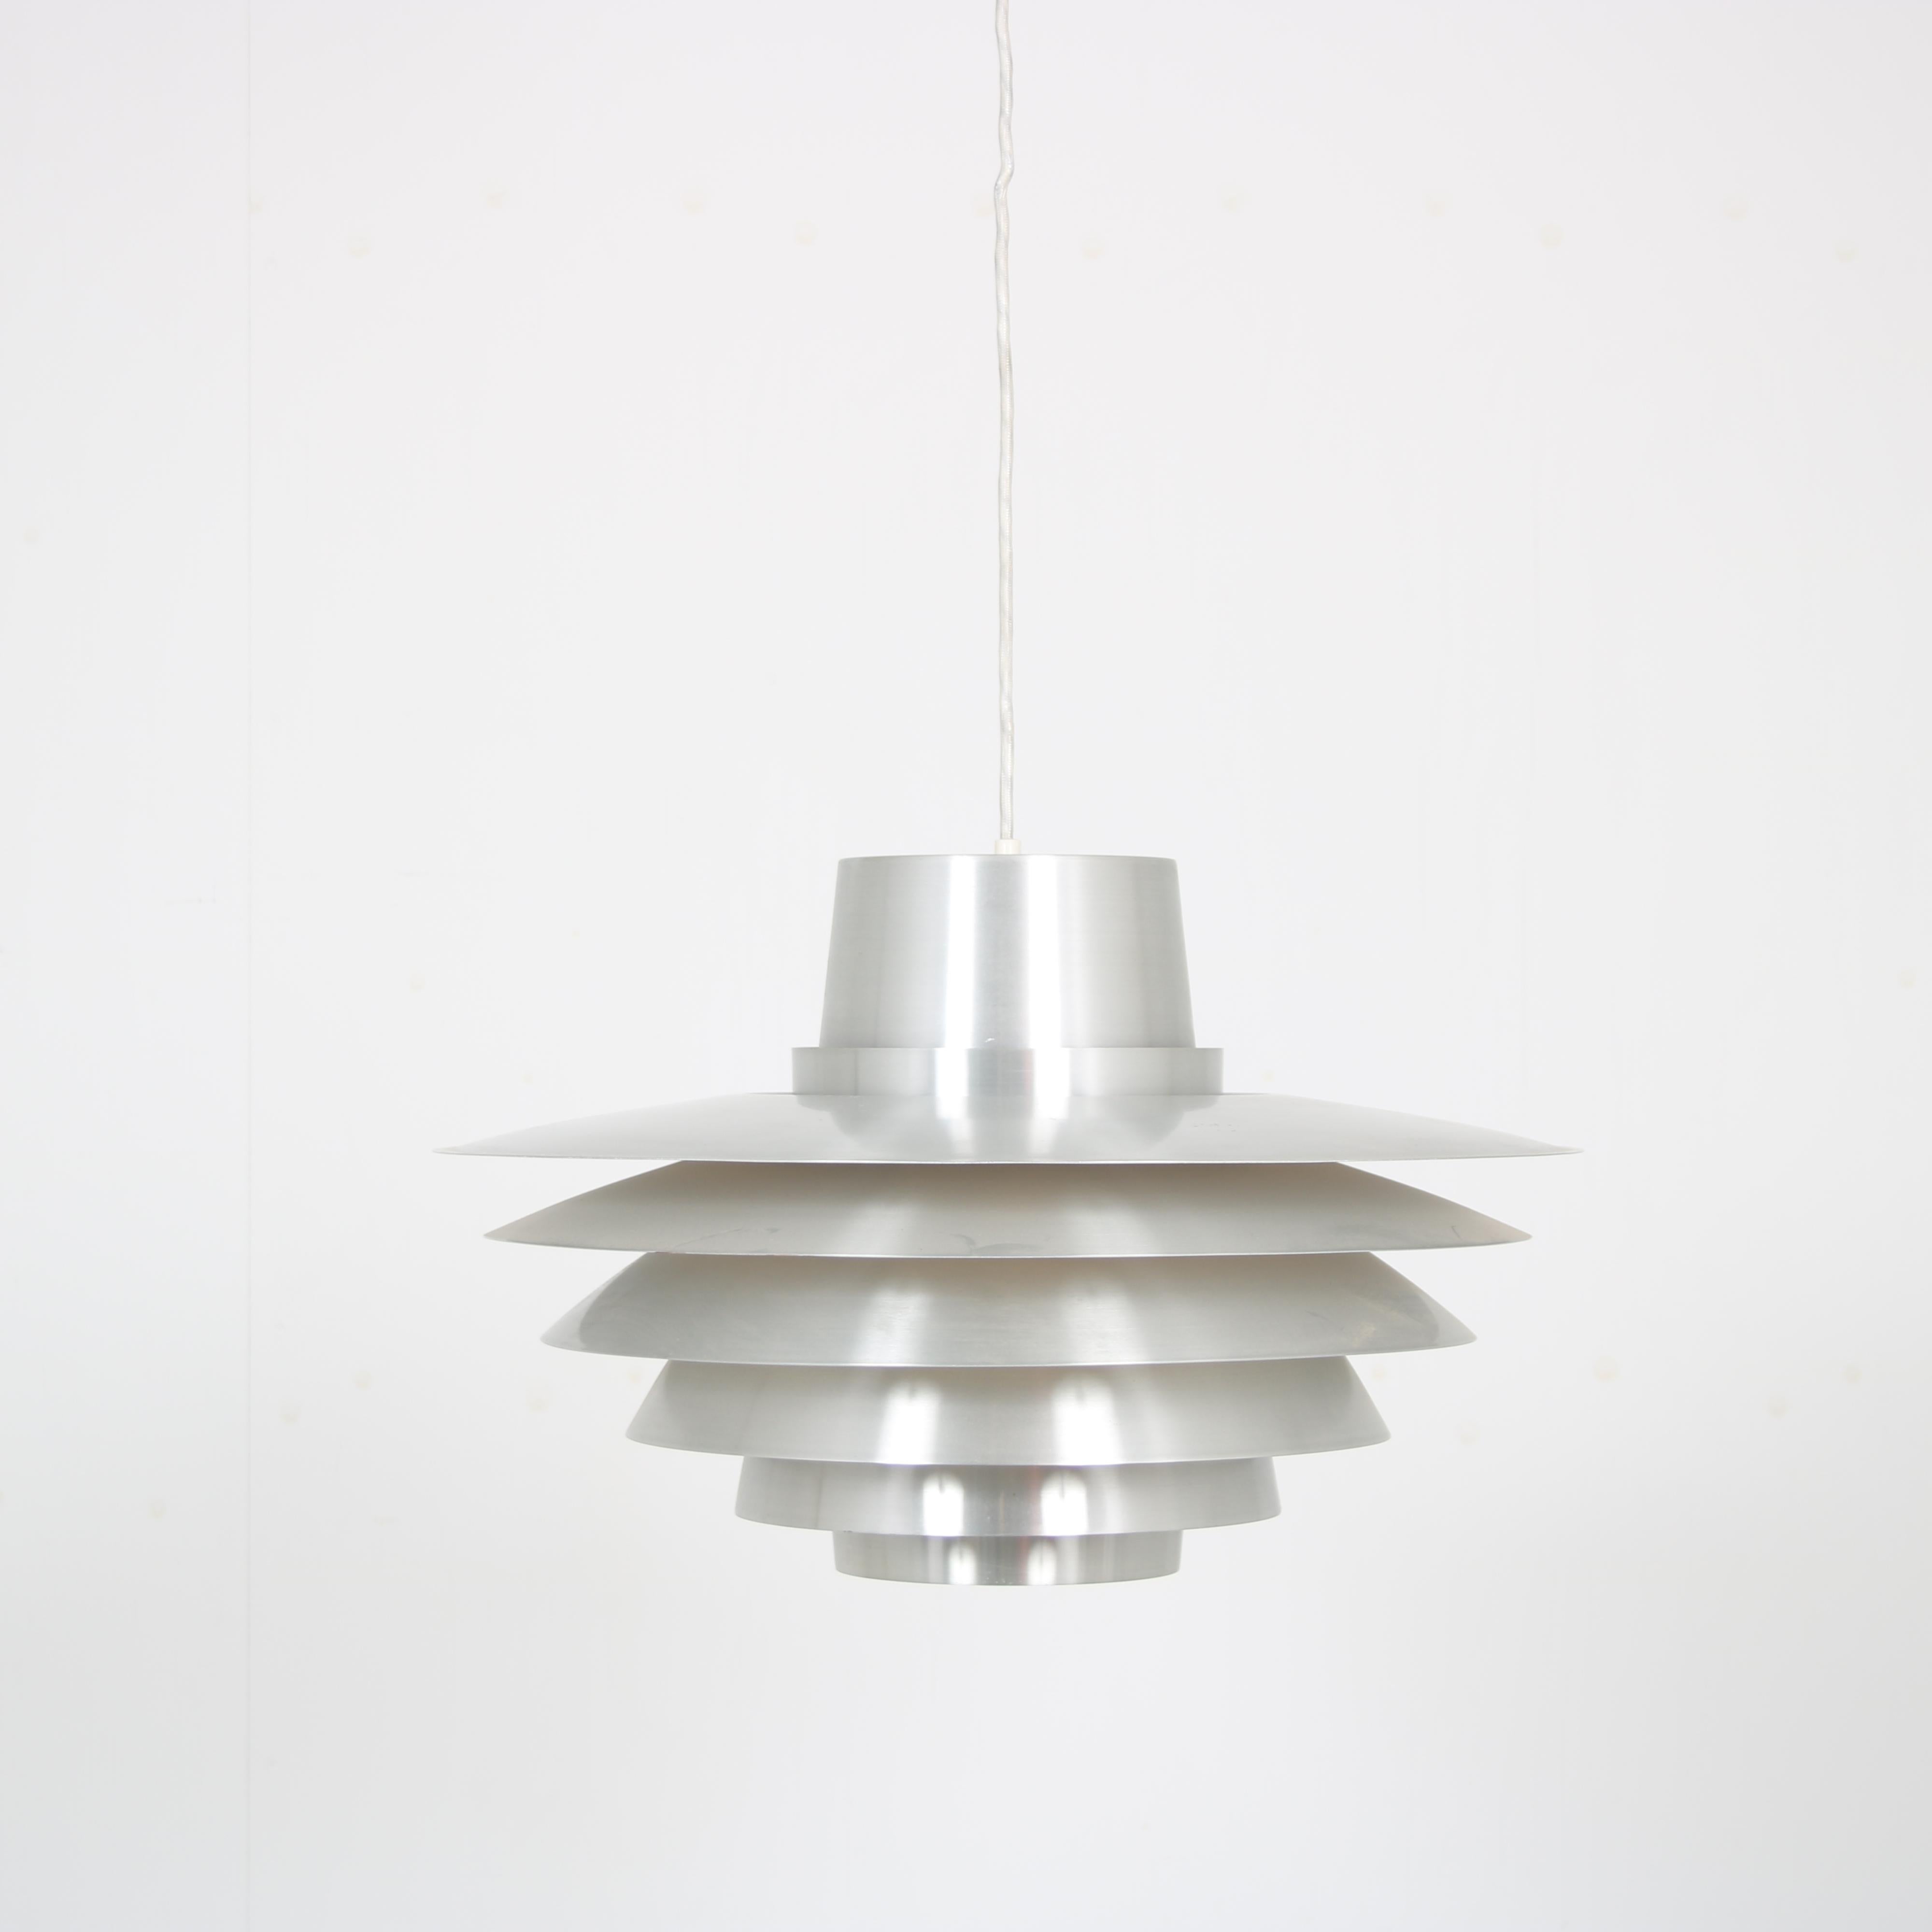 A beautiful hanging lamp, model “Verona”, desined by Svend Middelboe and manufactured by Nordisk Solar in Denmark around 1960.

This modern lamp is made of high quality aluminium in different layers. This allows aunique, beautiful light to emit when